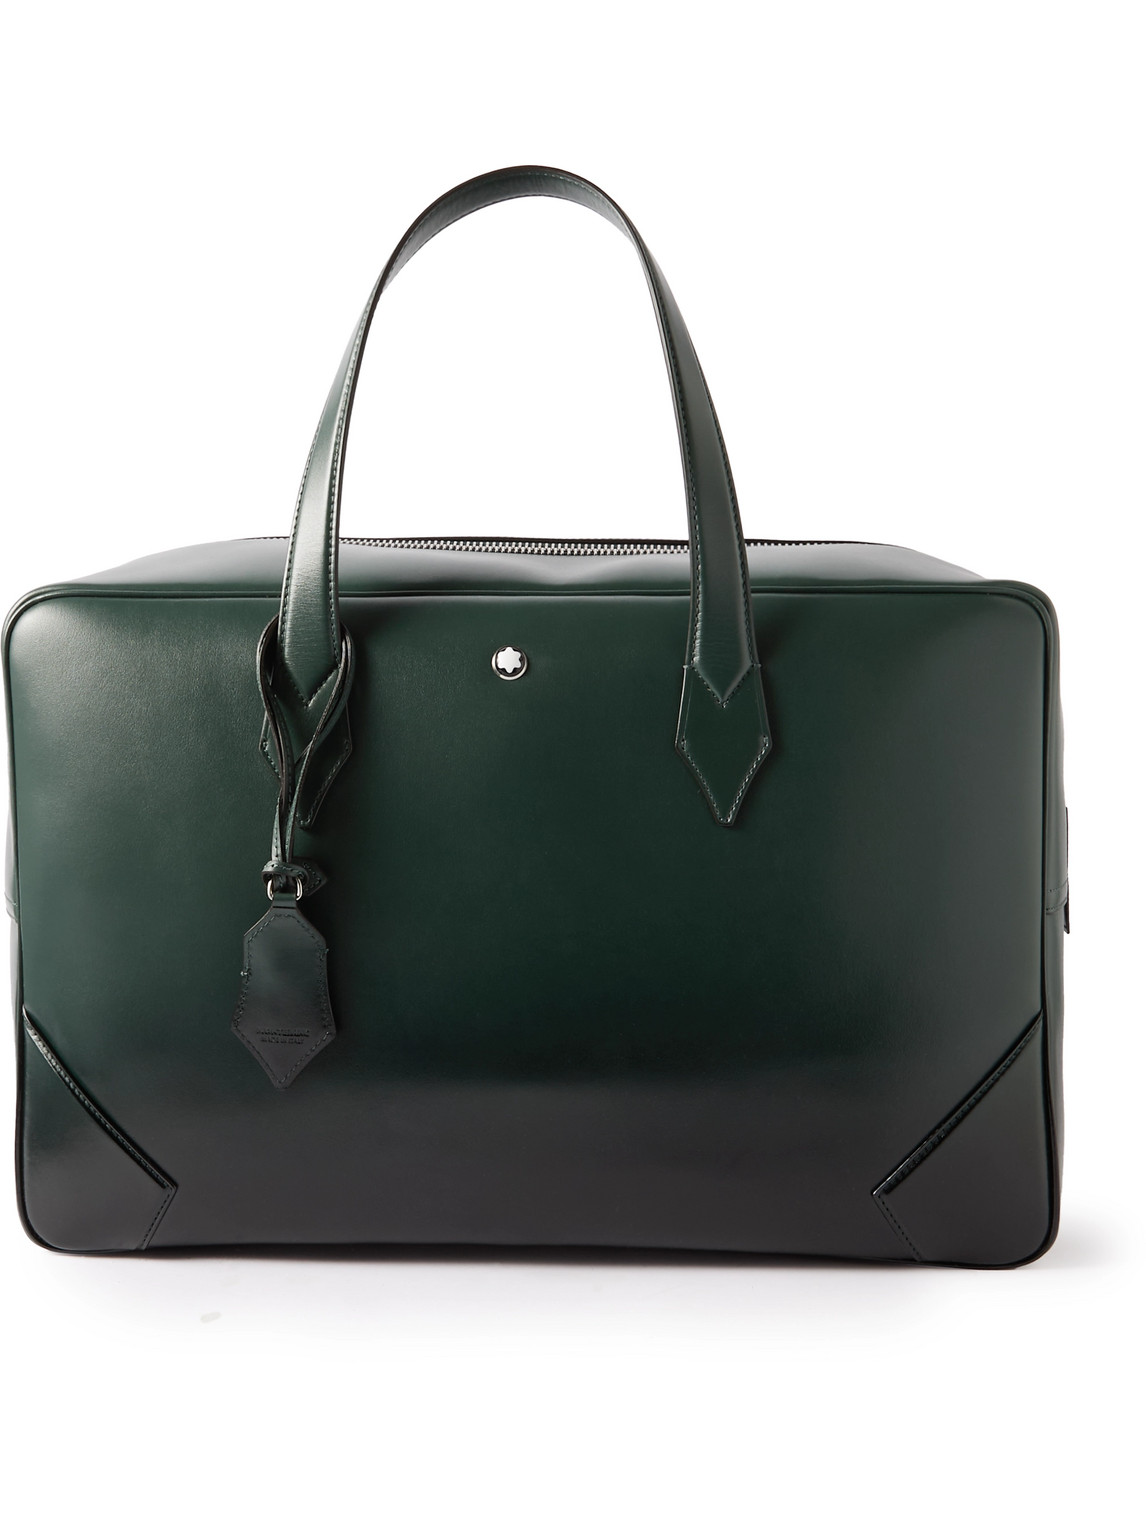 Montblanc 149 Leather Weekend Bag In Green